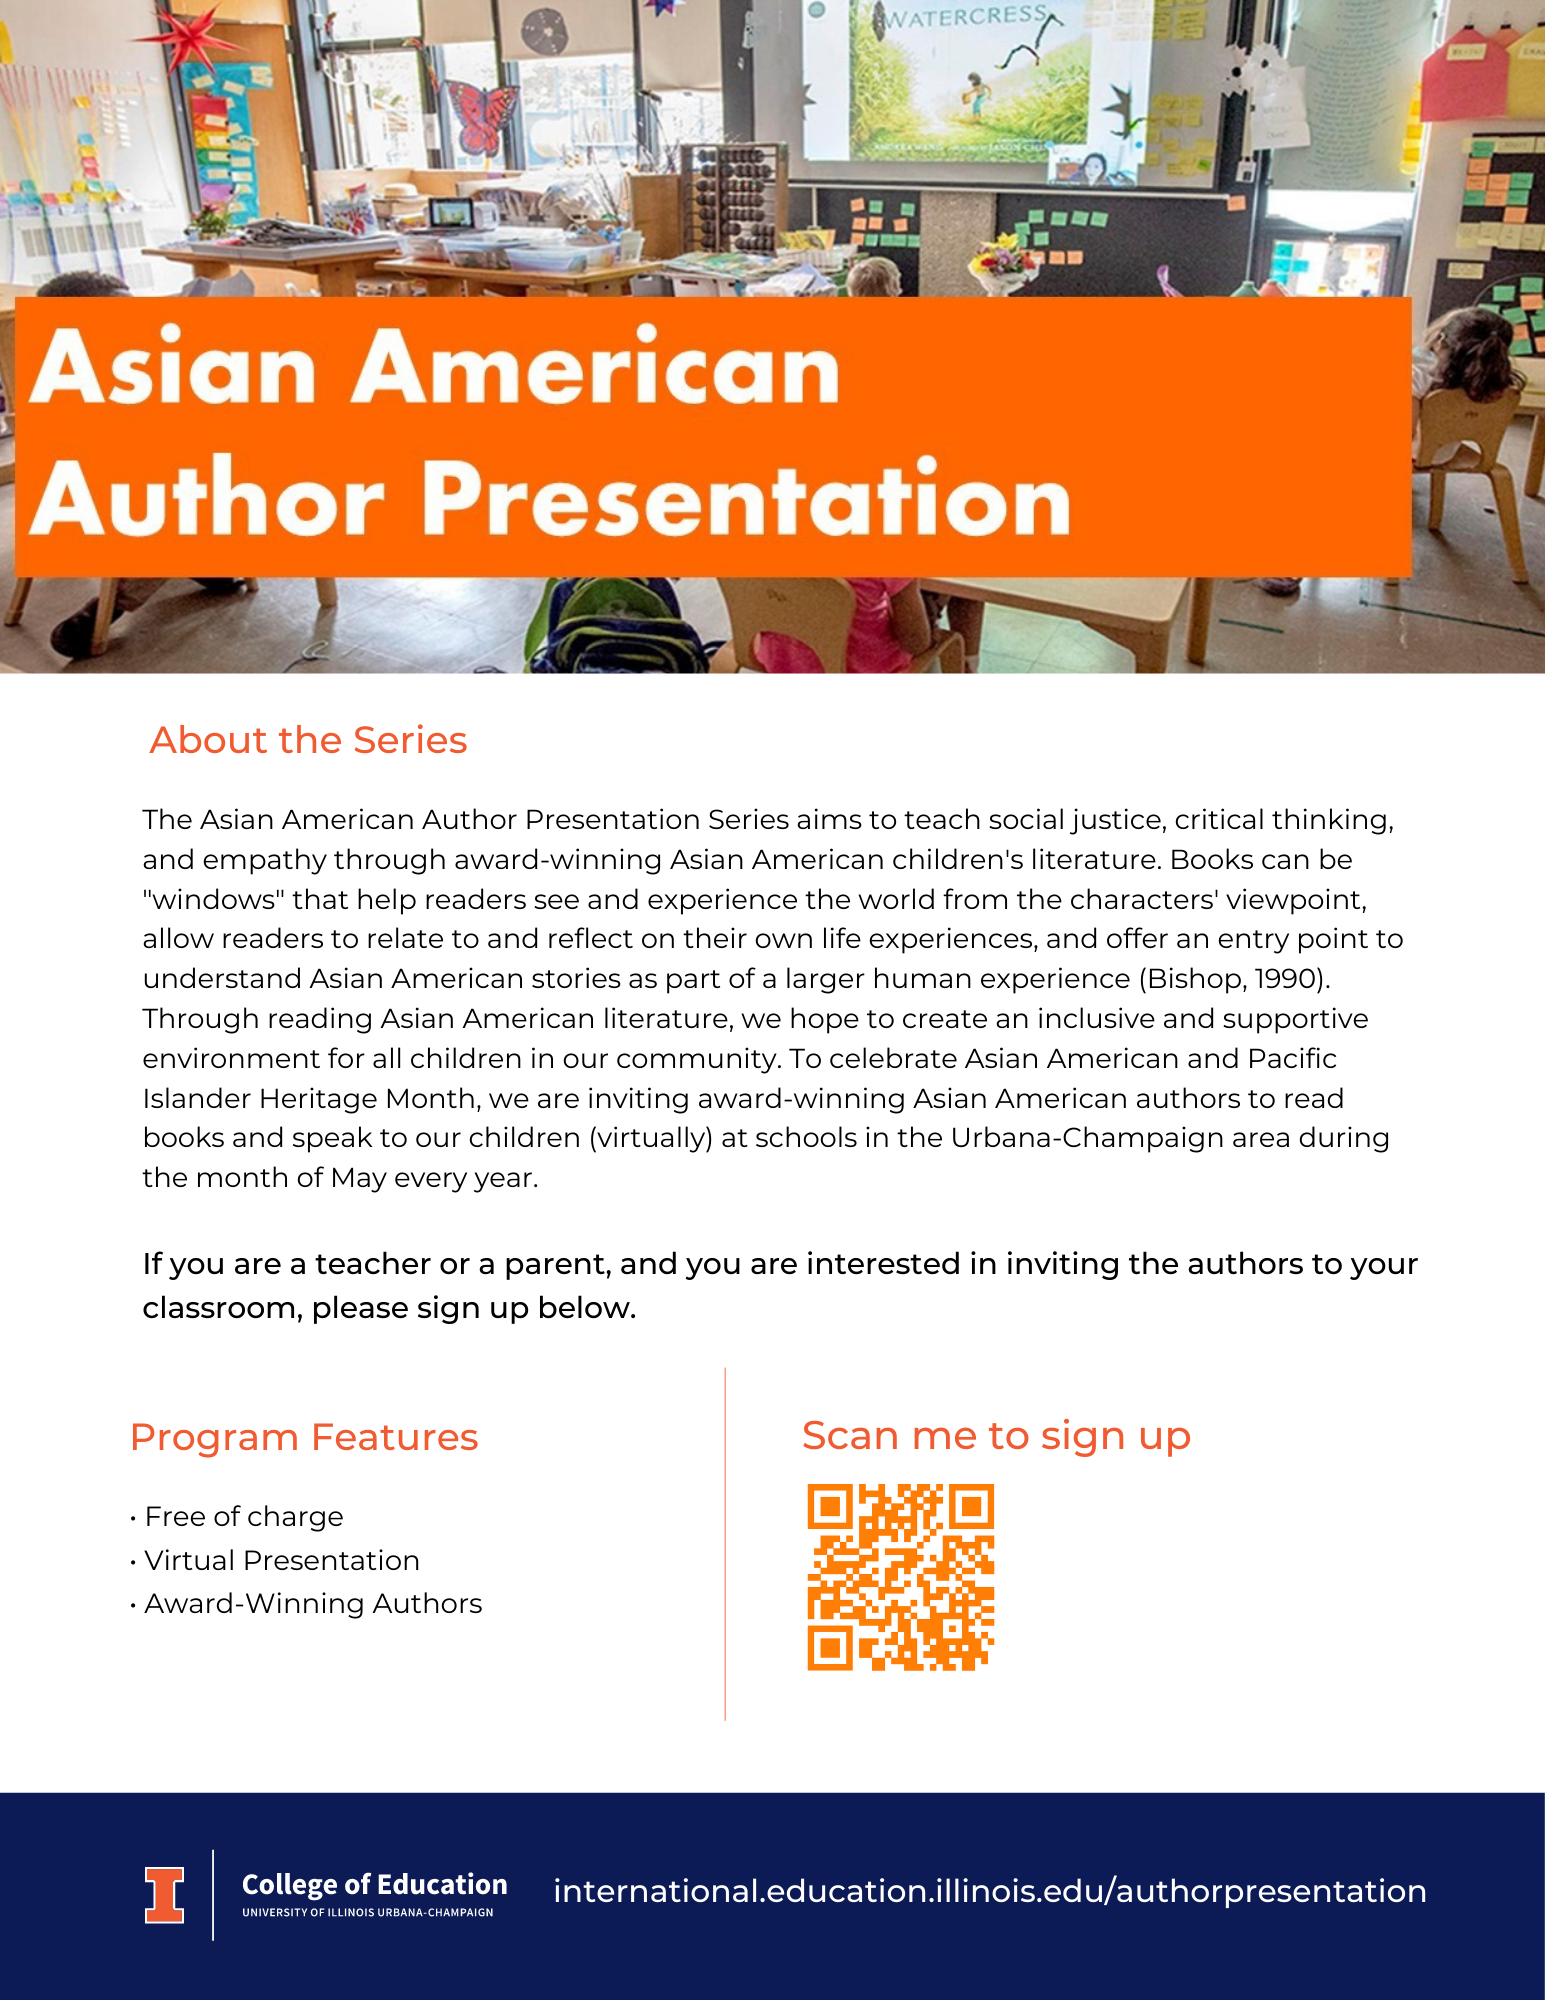 School Sign-up for Asian American Author Presentation